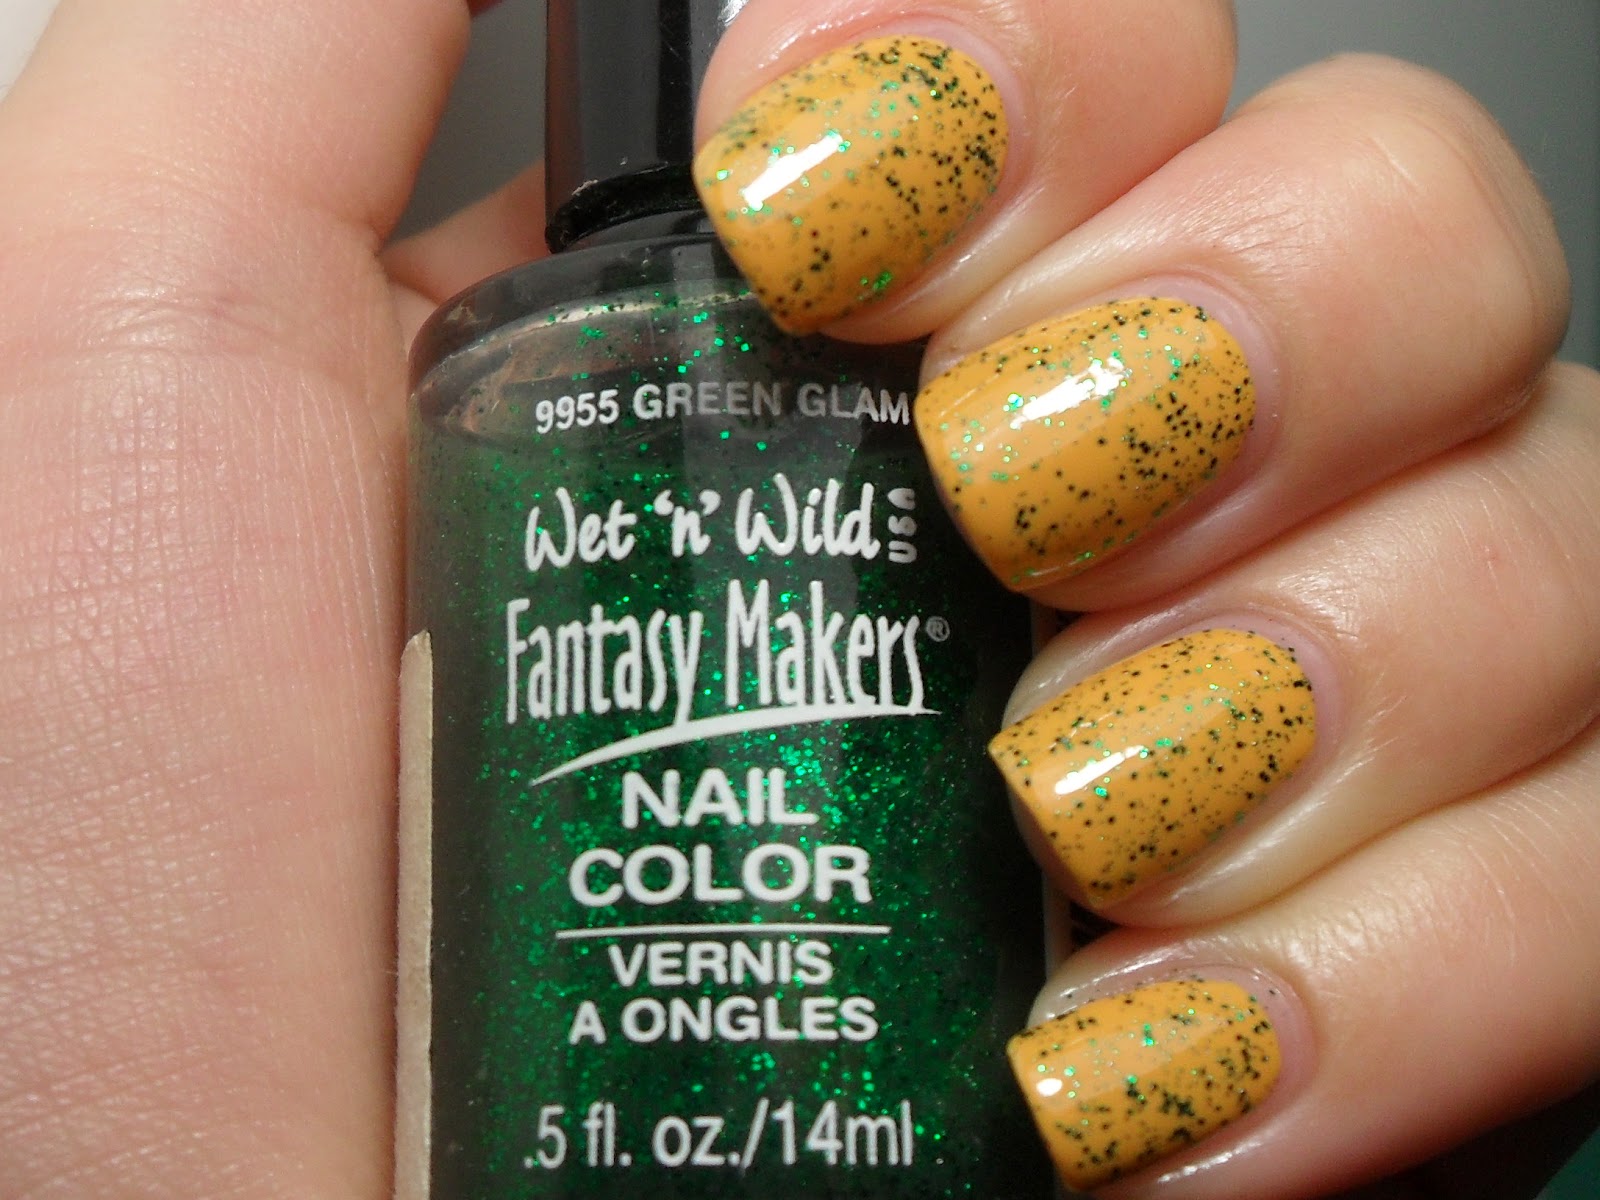 This lime green glitter comes from their long discontinued Nail Zone line